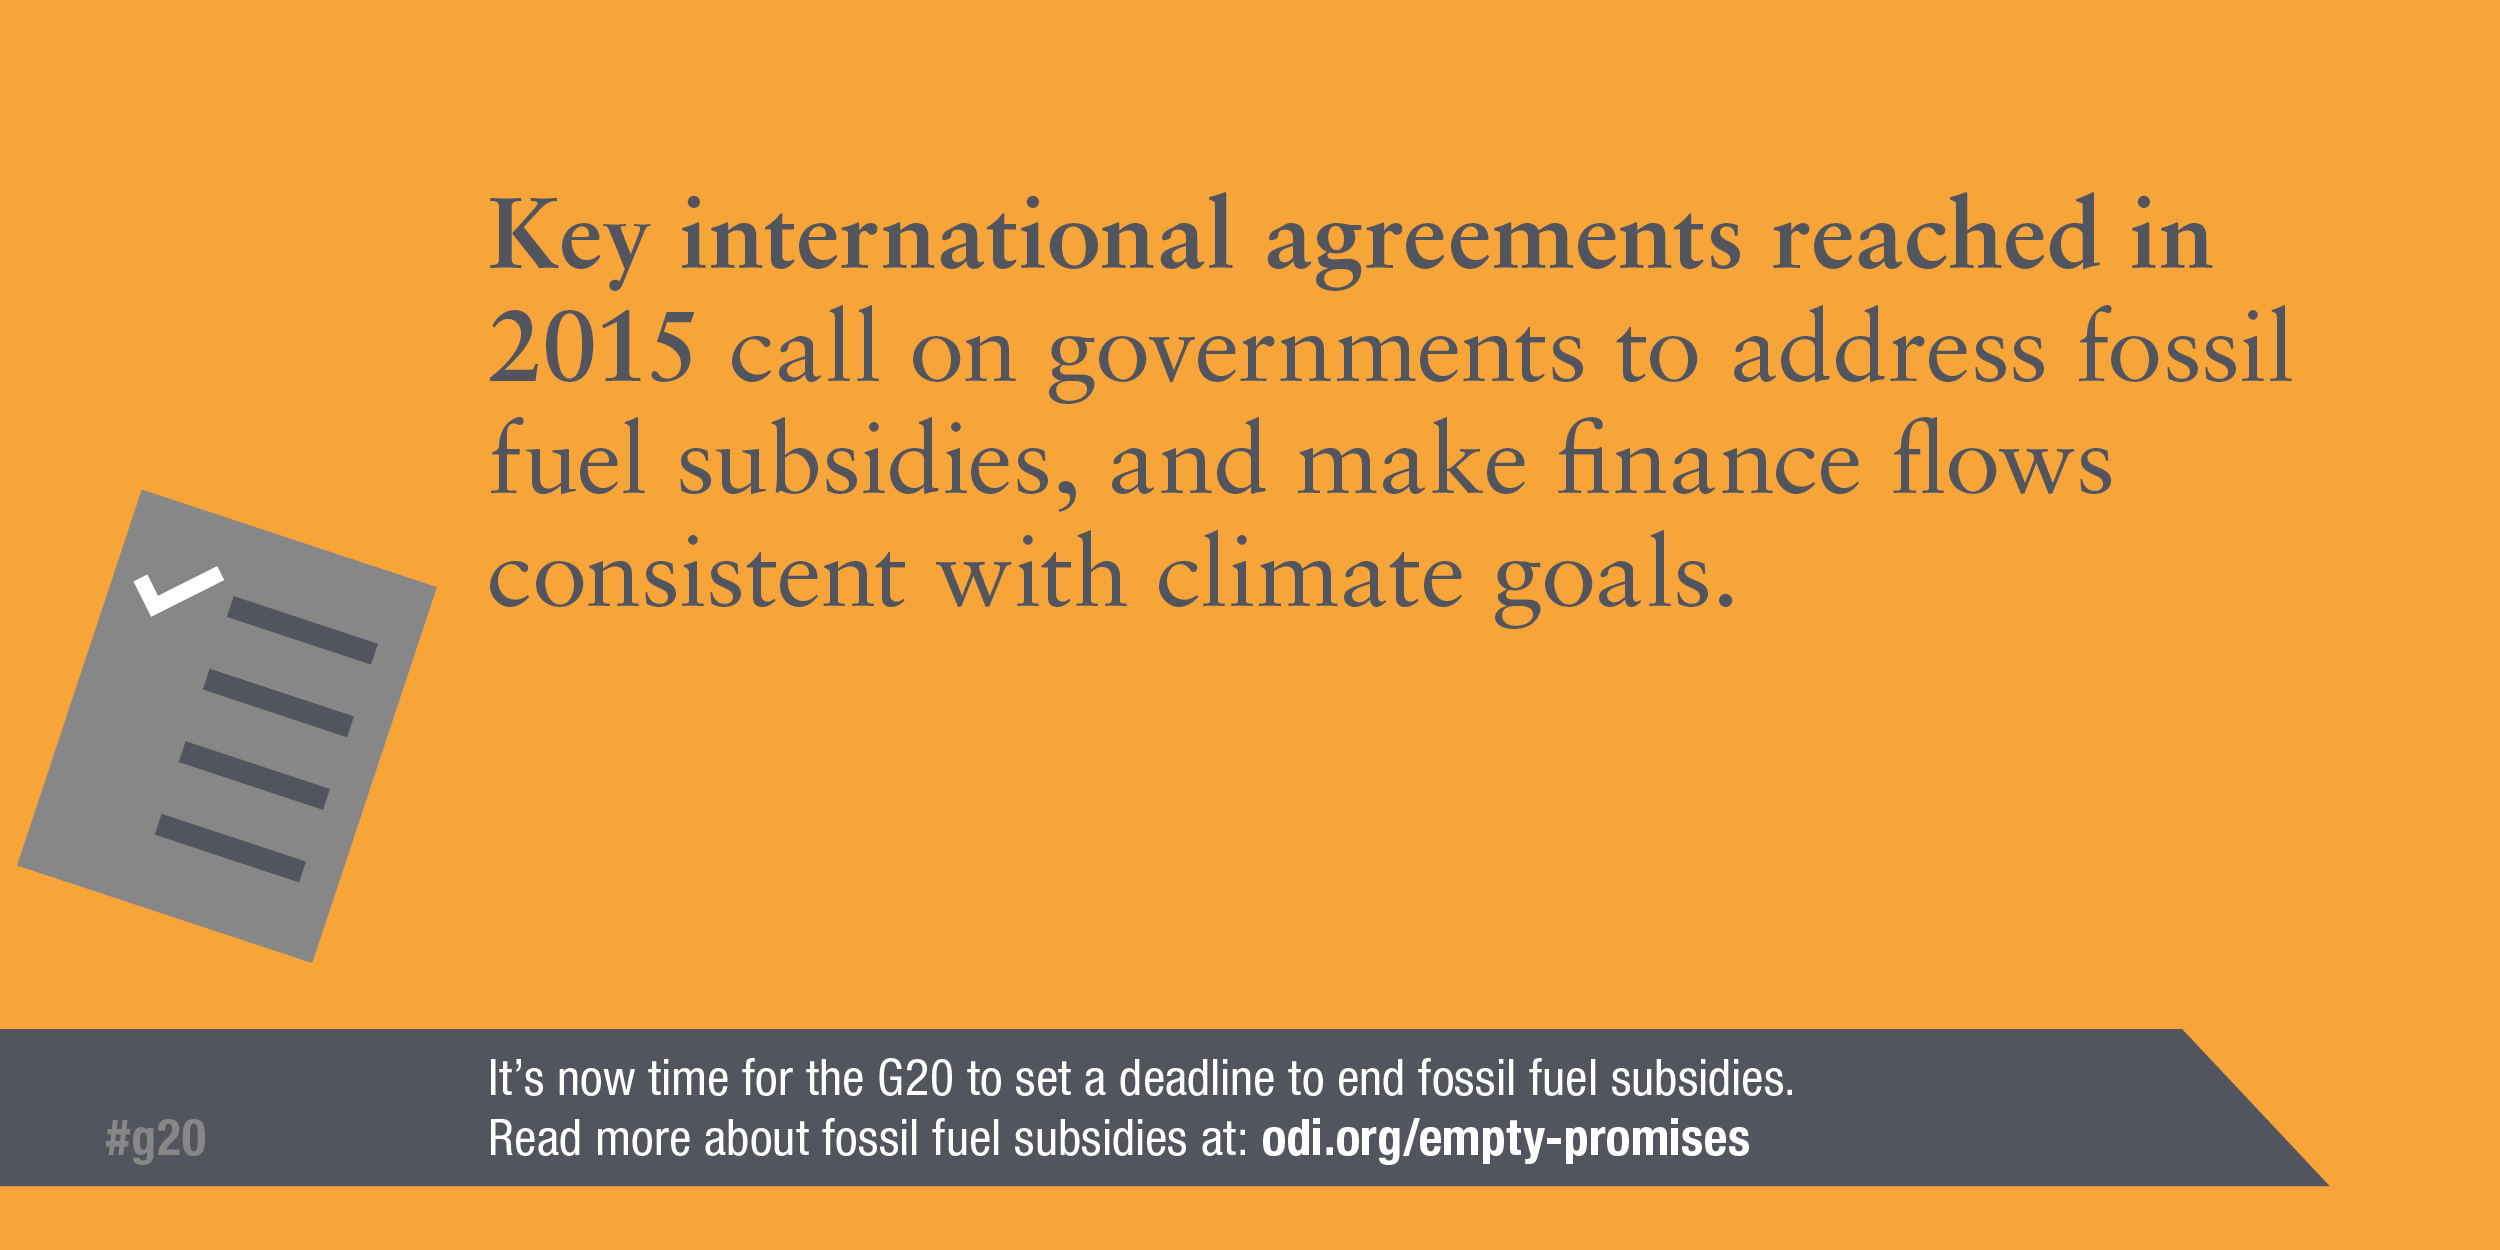 Infographic: International agreements in 2015 called on governments to address fossil fuel subsidies